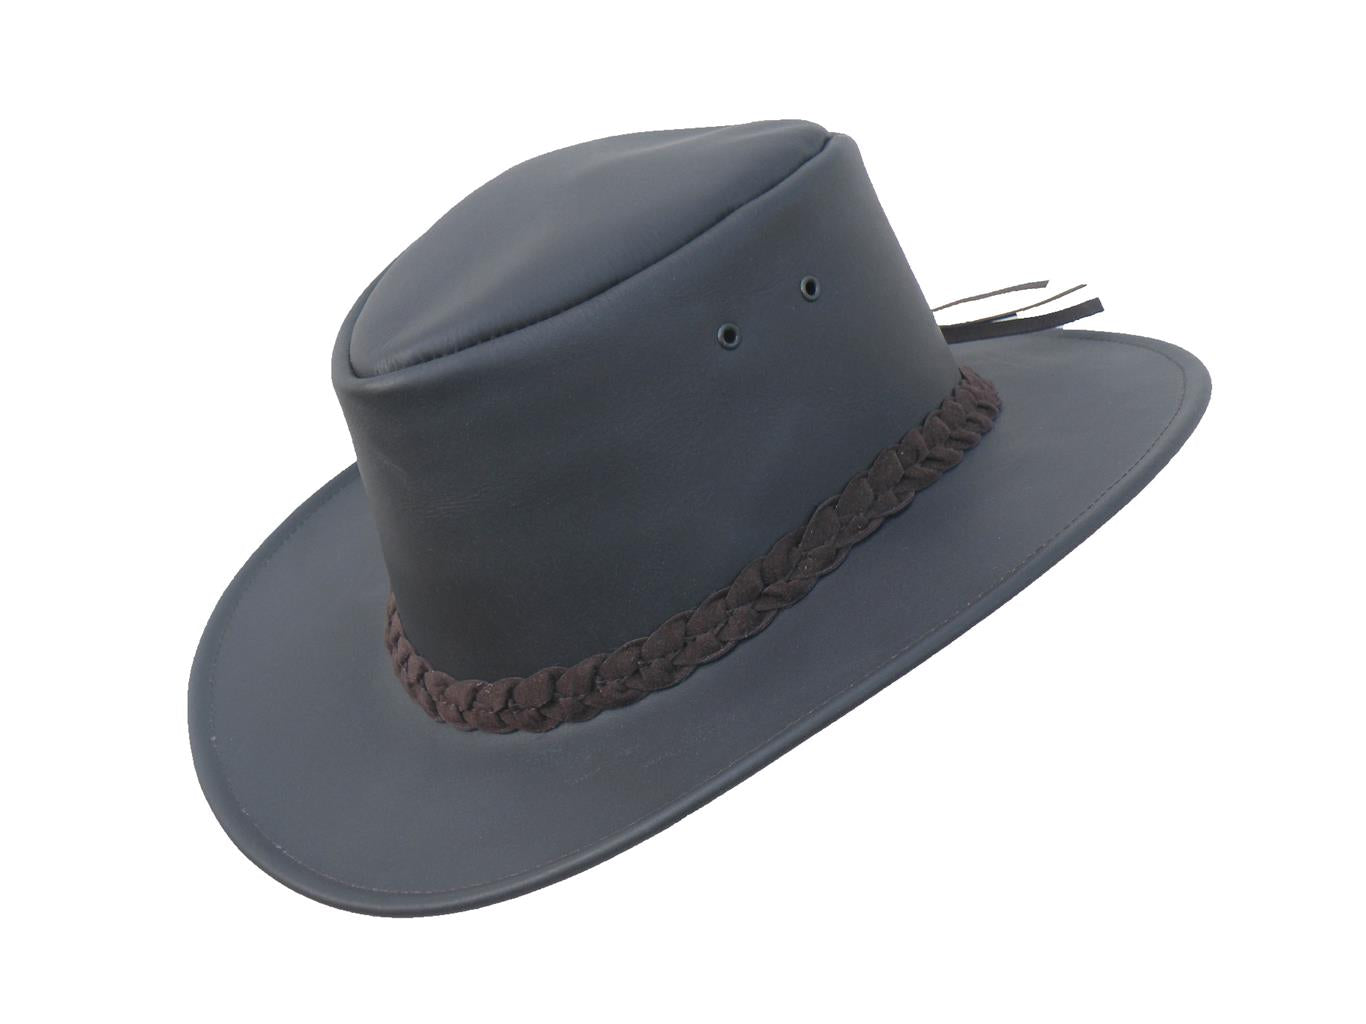 Colonial Leather Hat